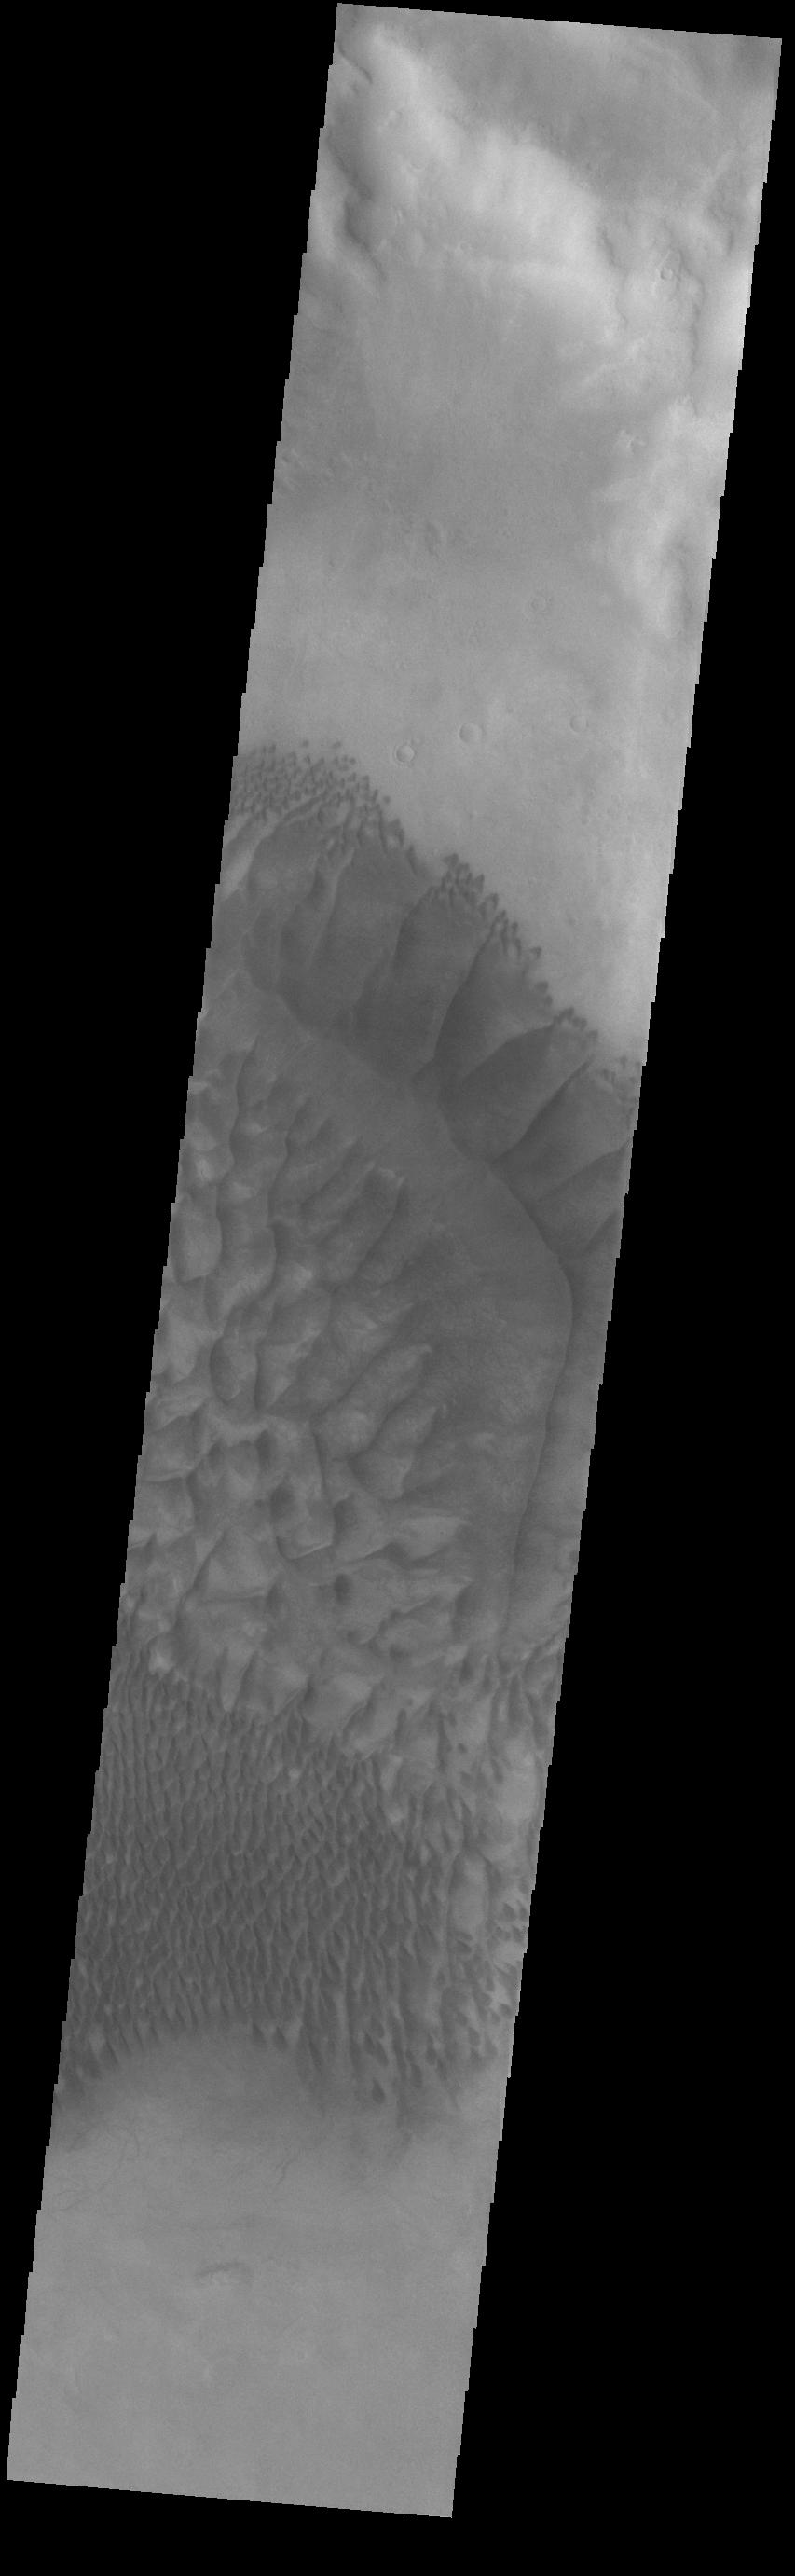 PIA24242: Russell Crater Dunes